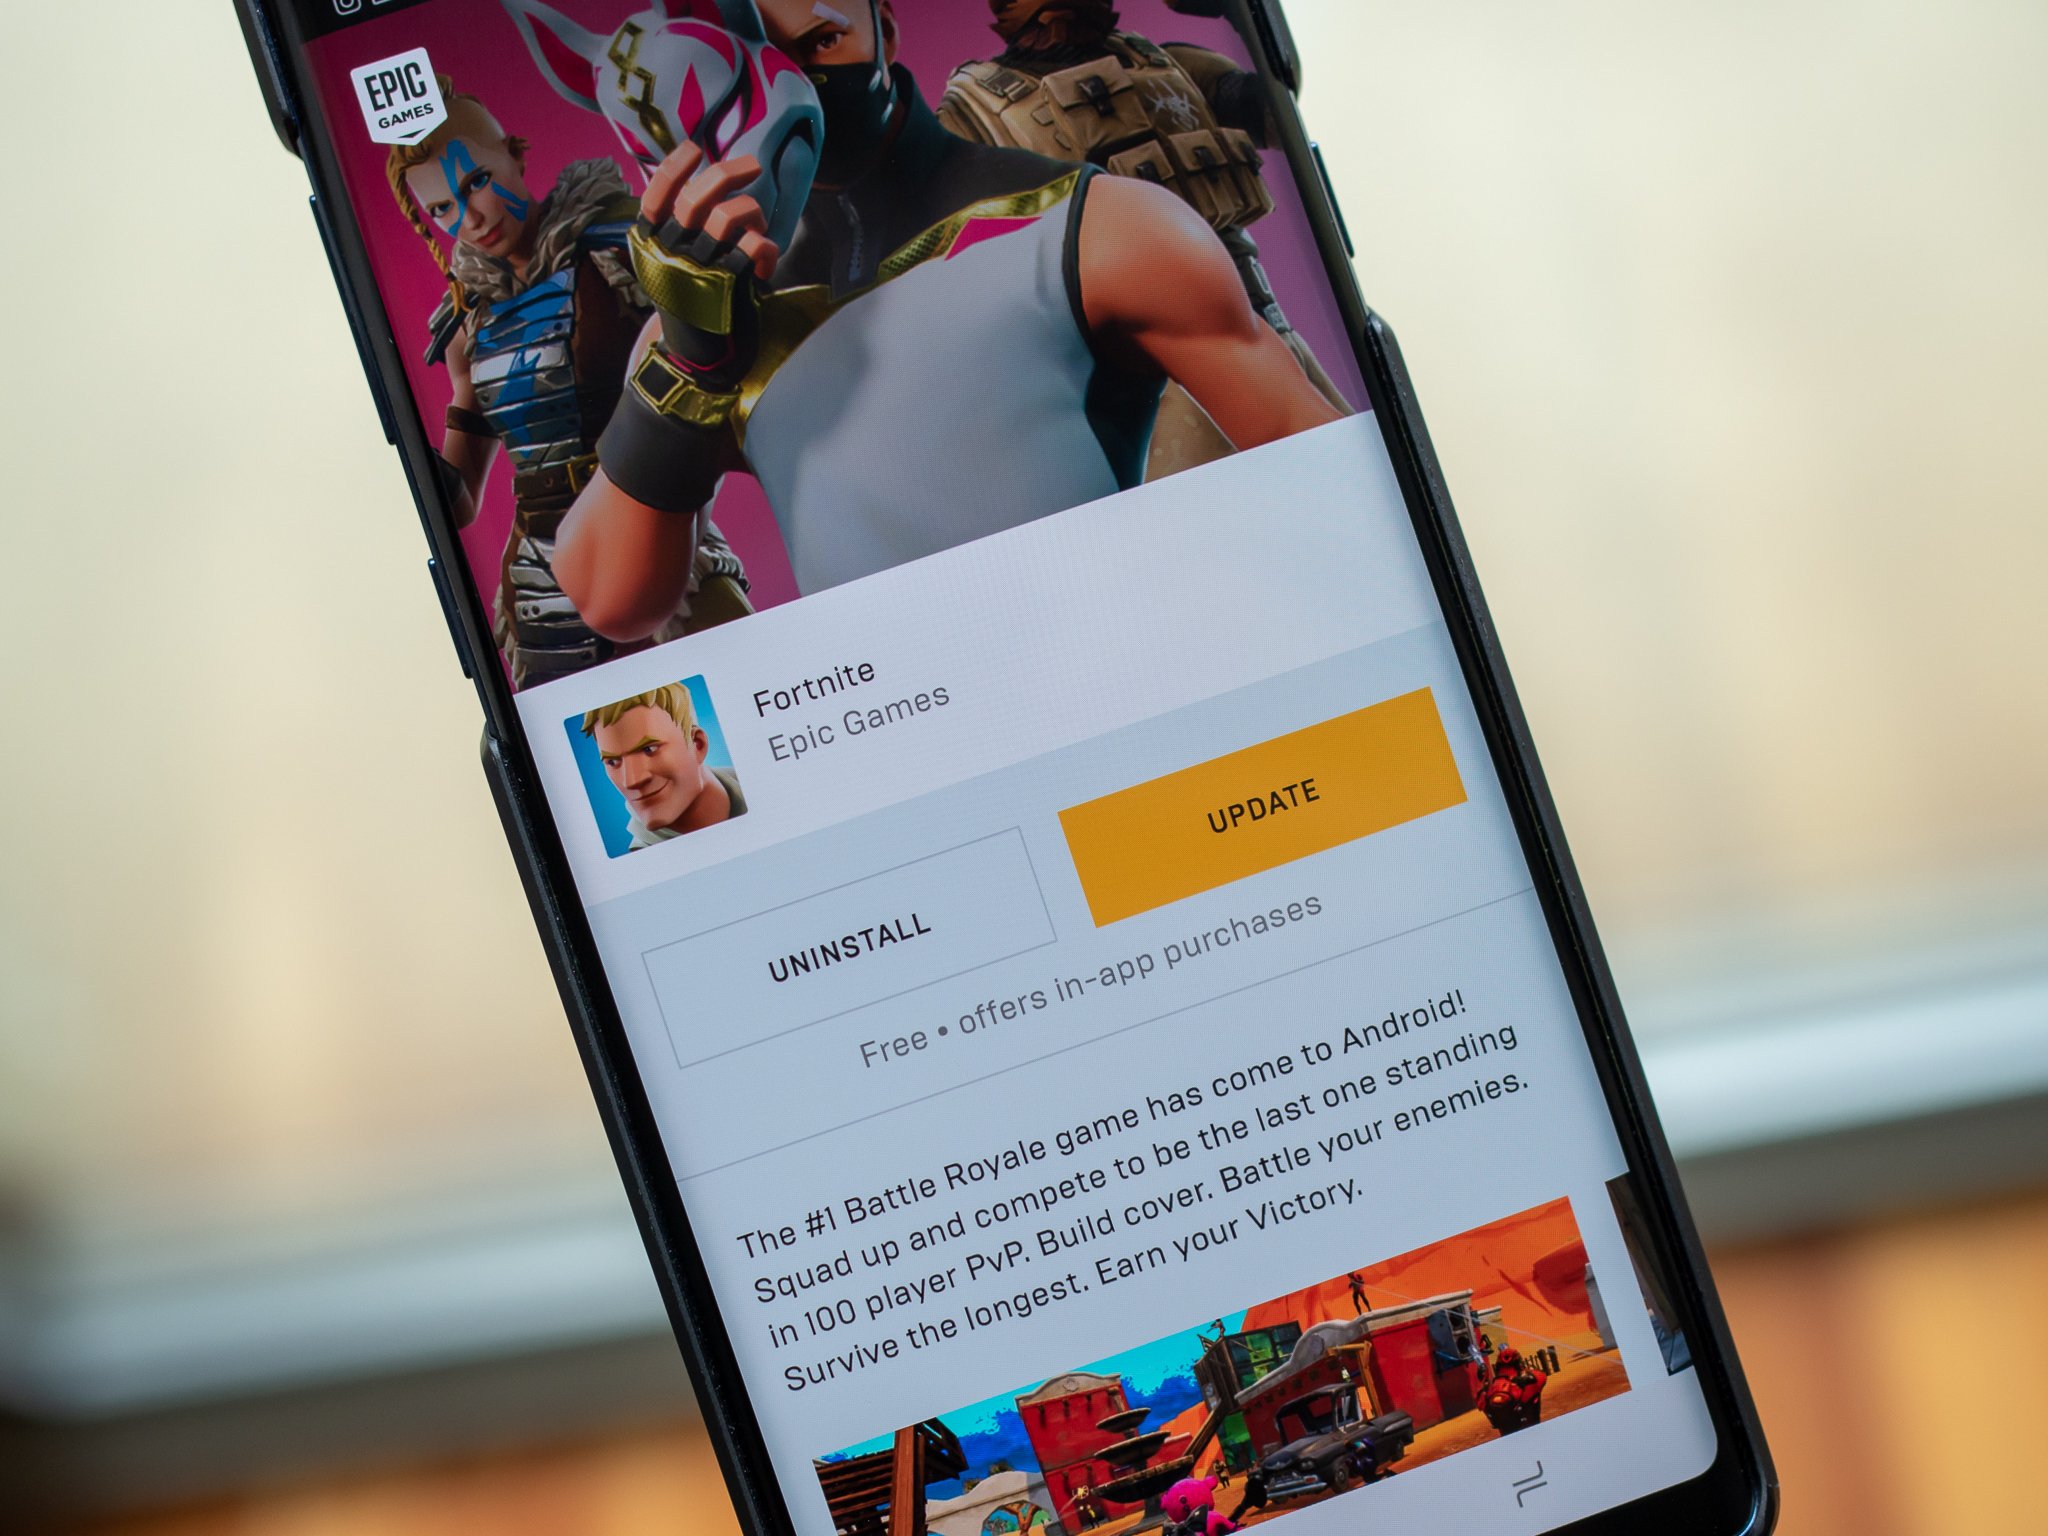 epic s first fortnite installer allowed hackers to download and install anything on your android phone silently - epic game fortnite android